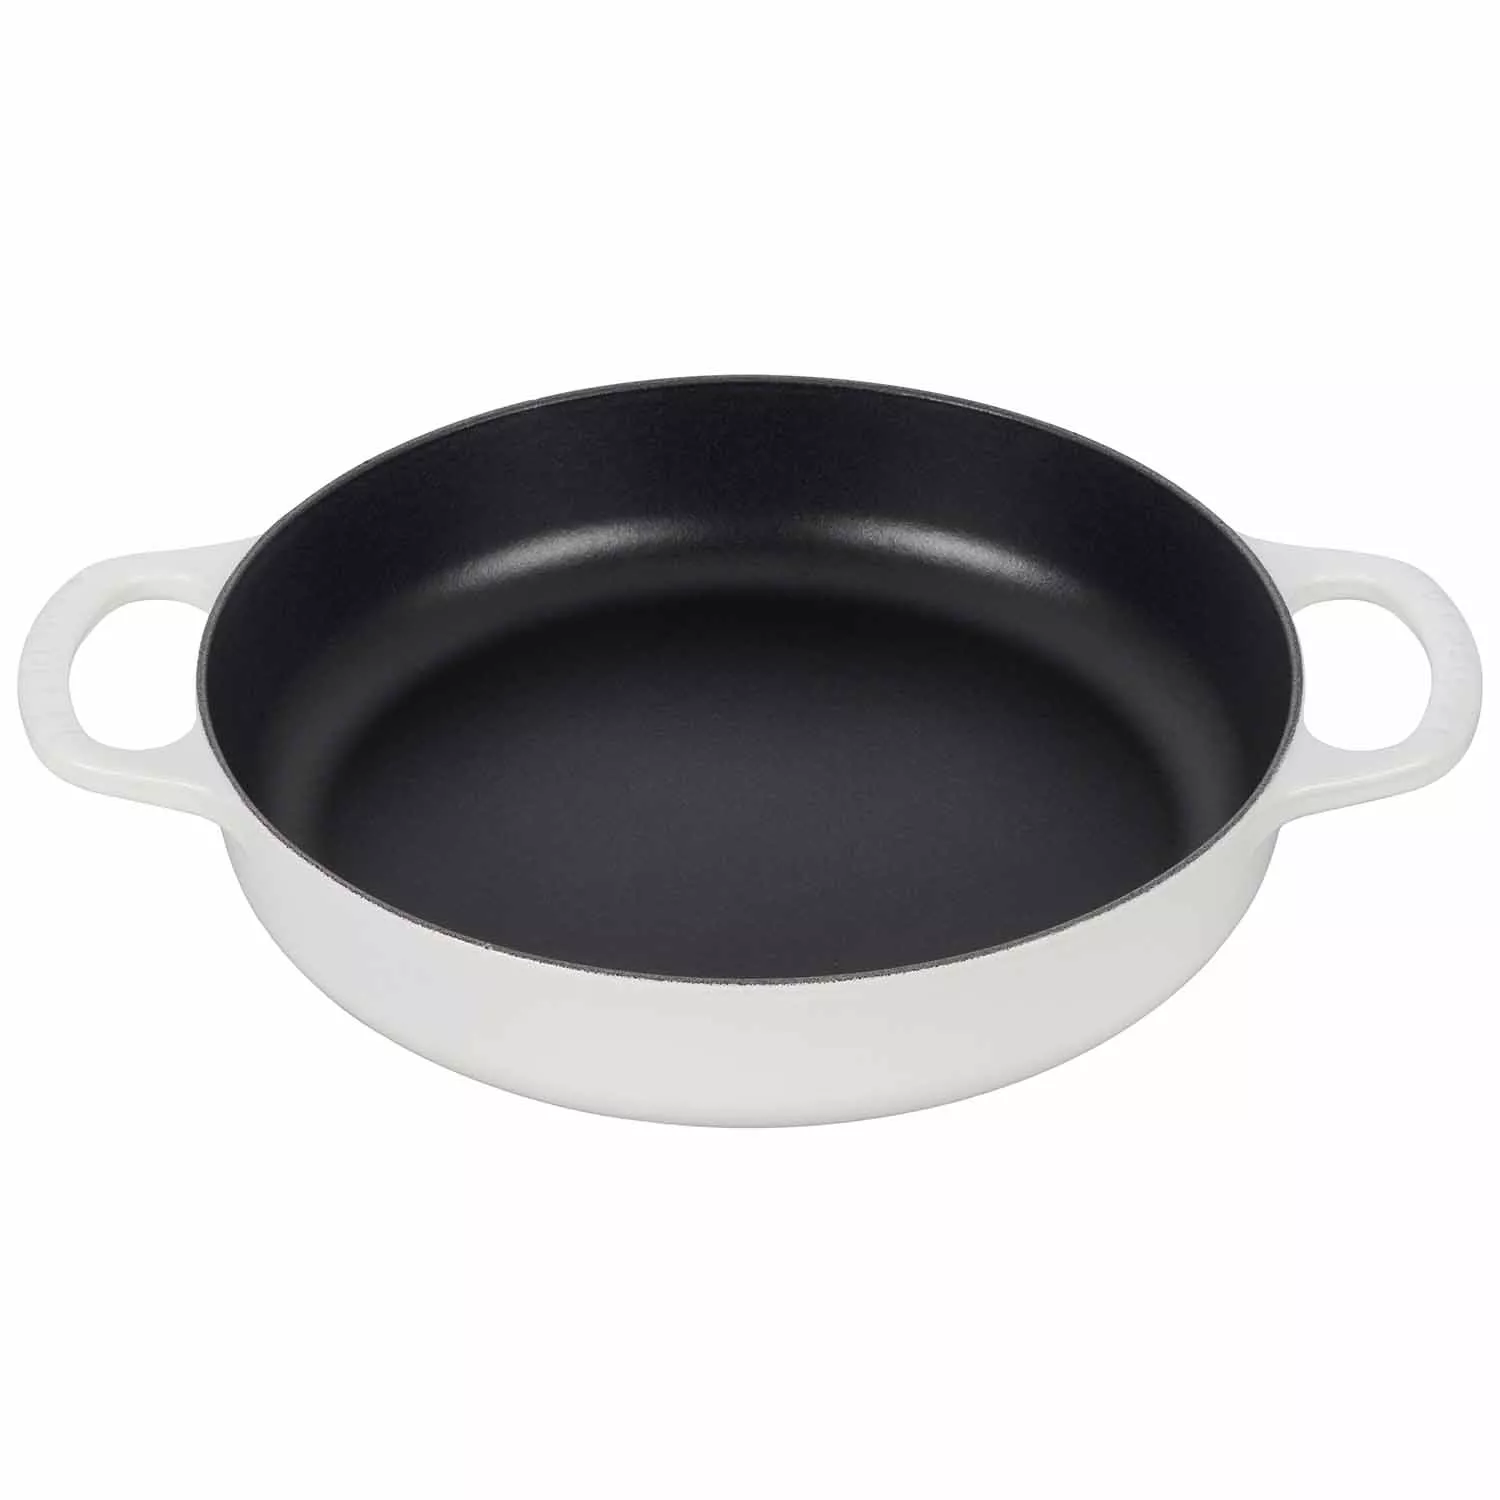 Le Creuset Enameled Cast Iron 11 Everyday Pan 